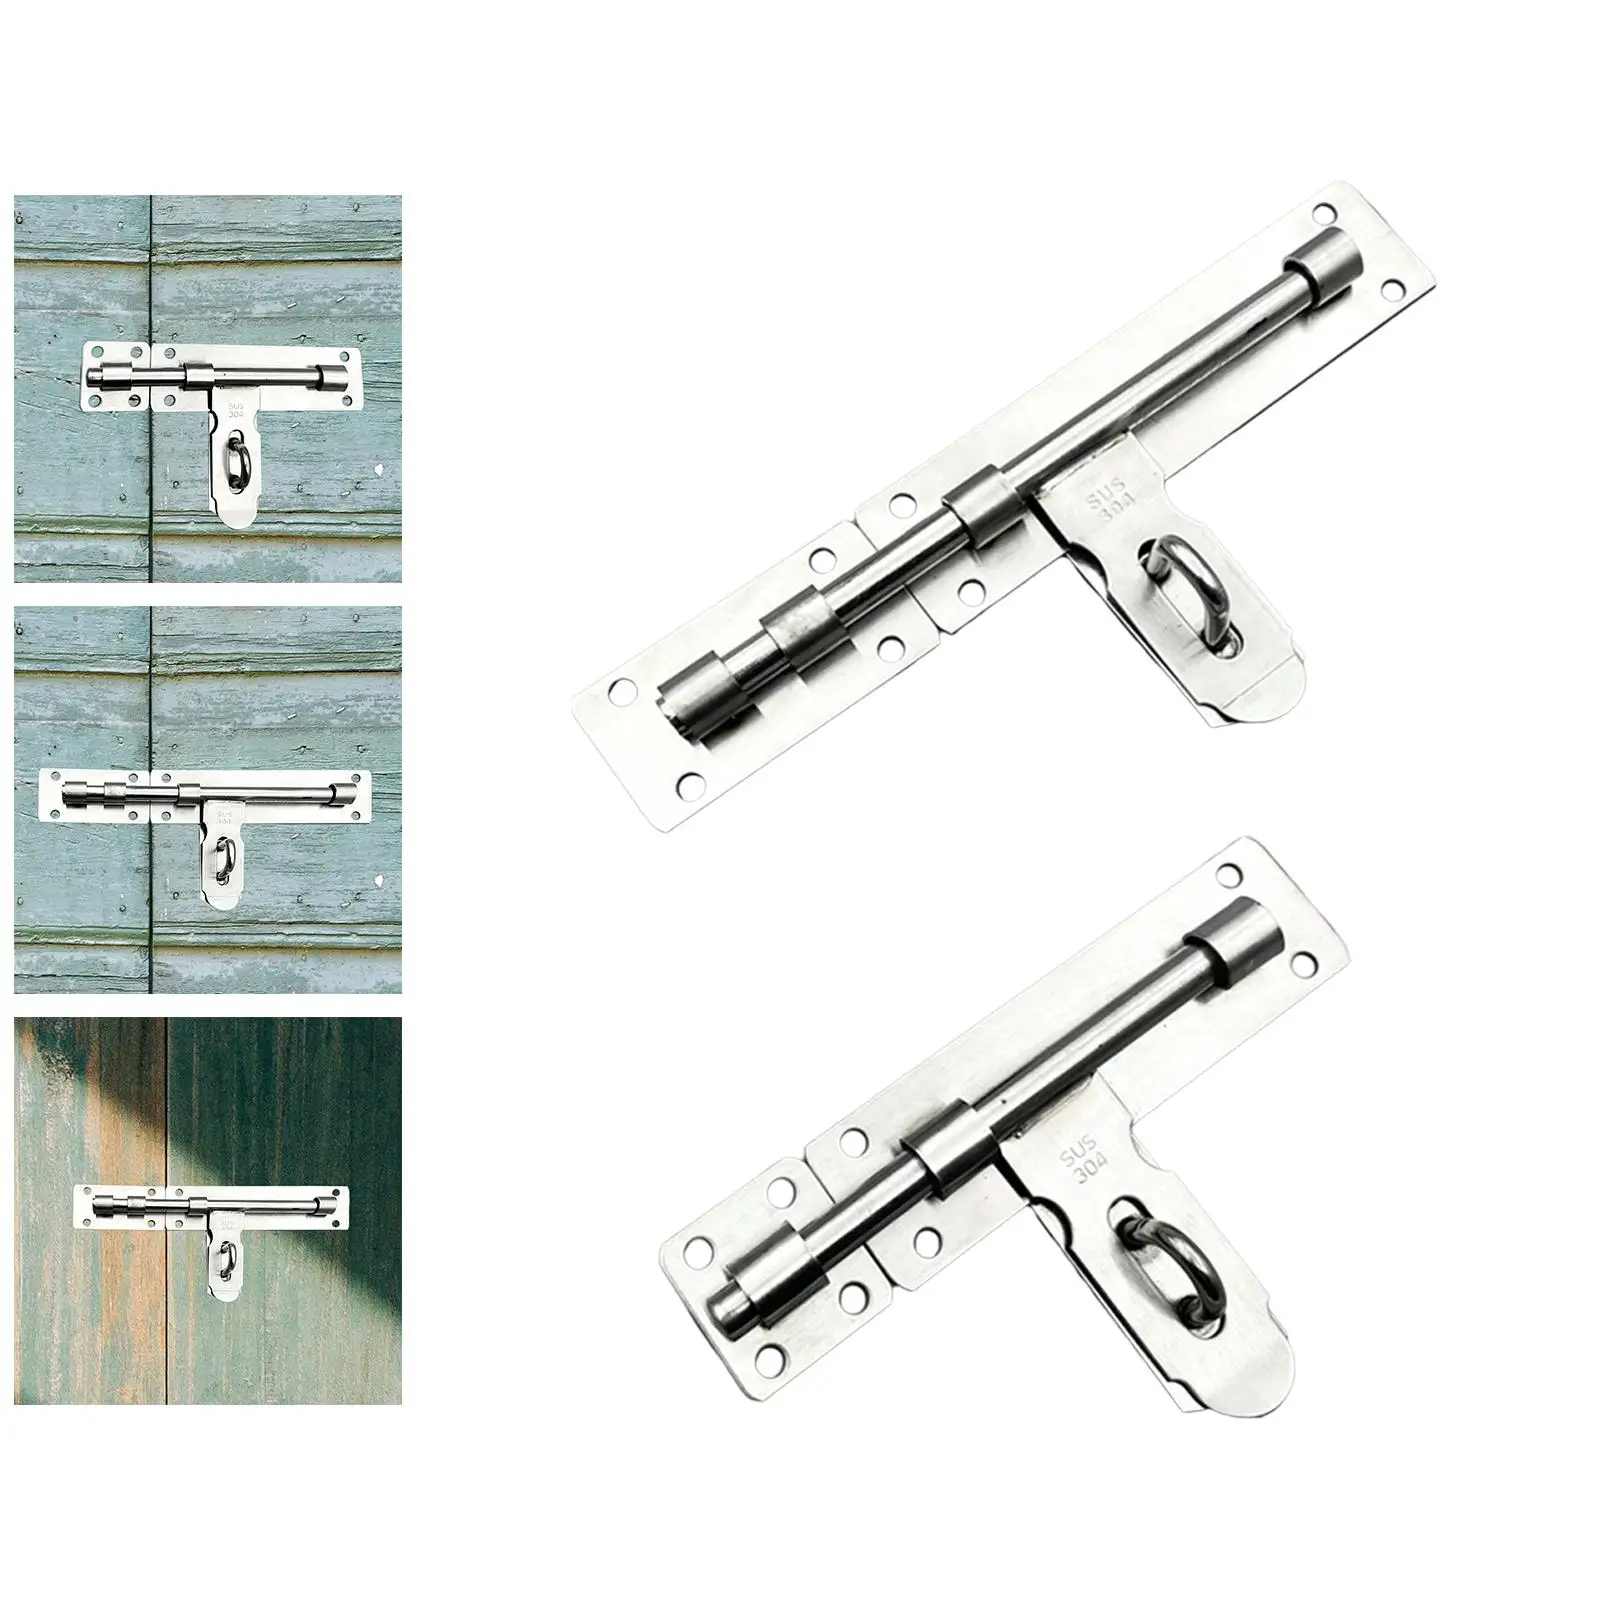 4x Door Security Bolt Latch Slide Latch Lock for Dormitory Household Office